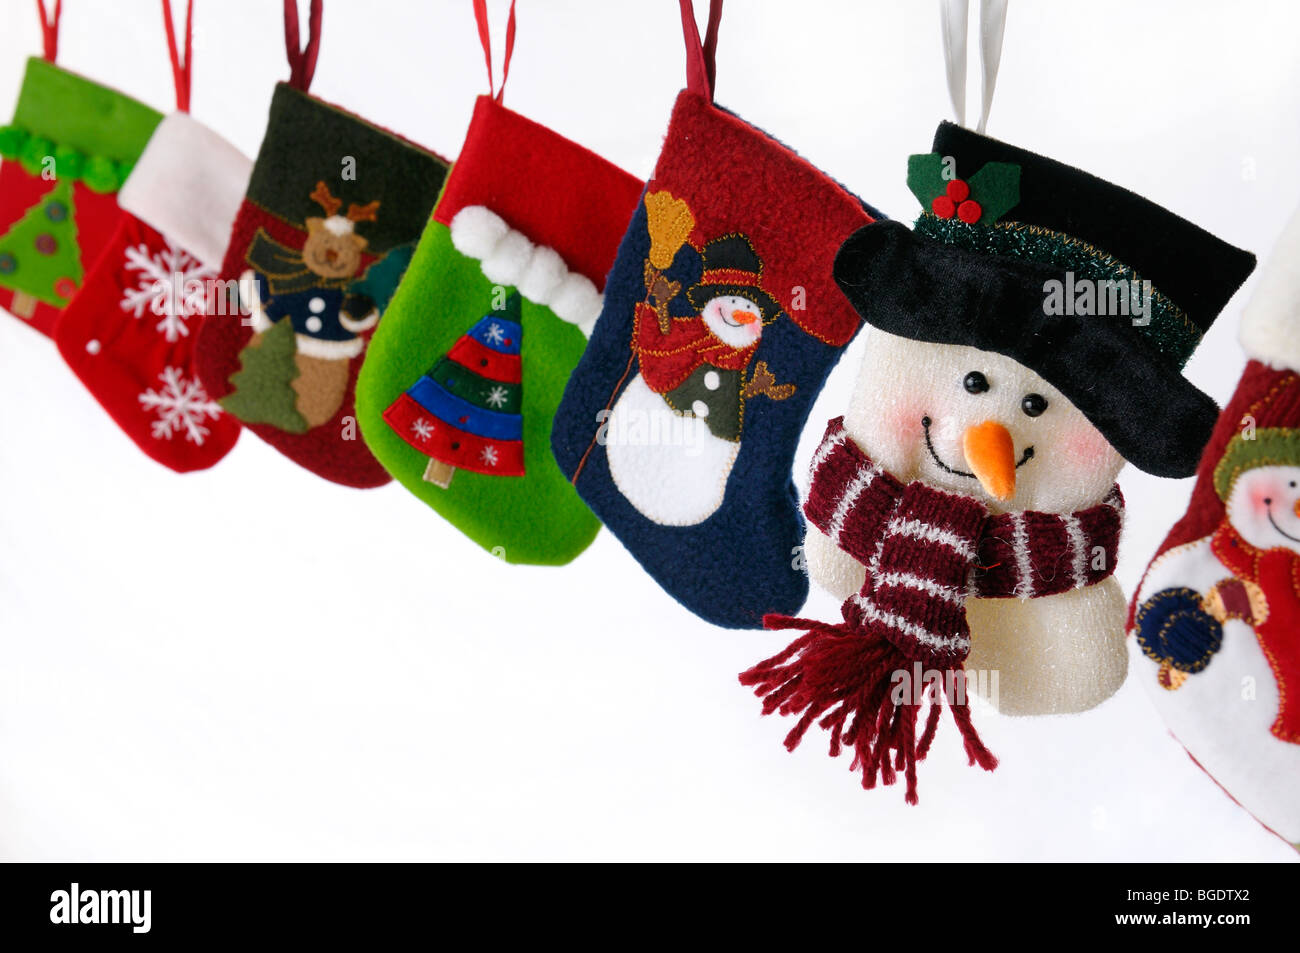 Collection of Christmas stockings with snowmen hanging on white background Stock Photo